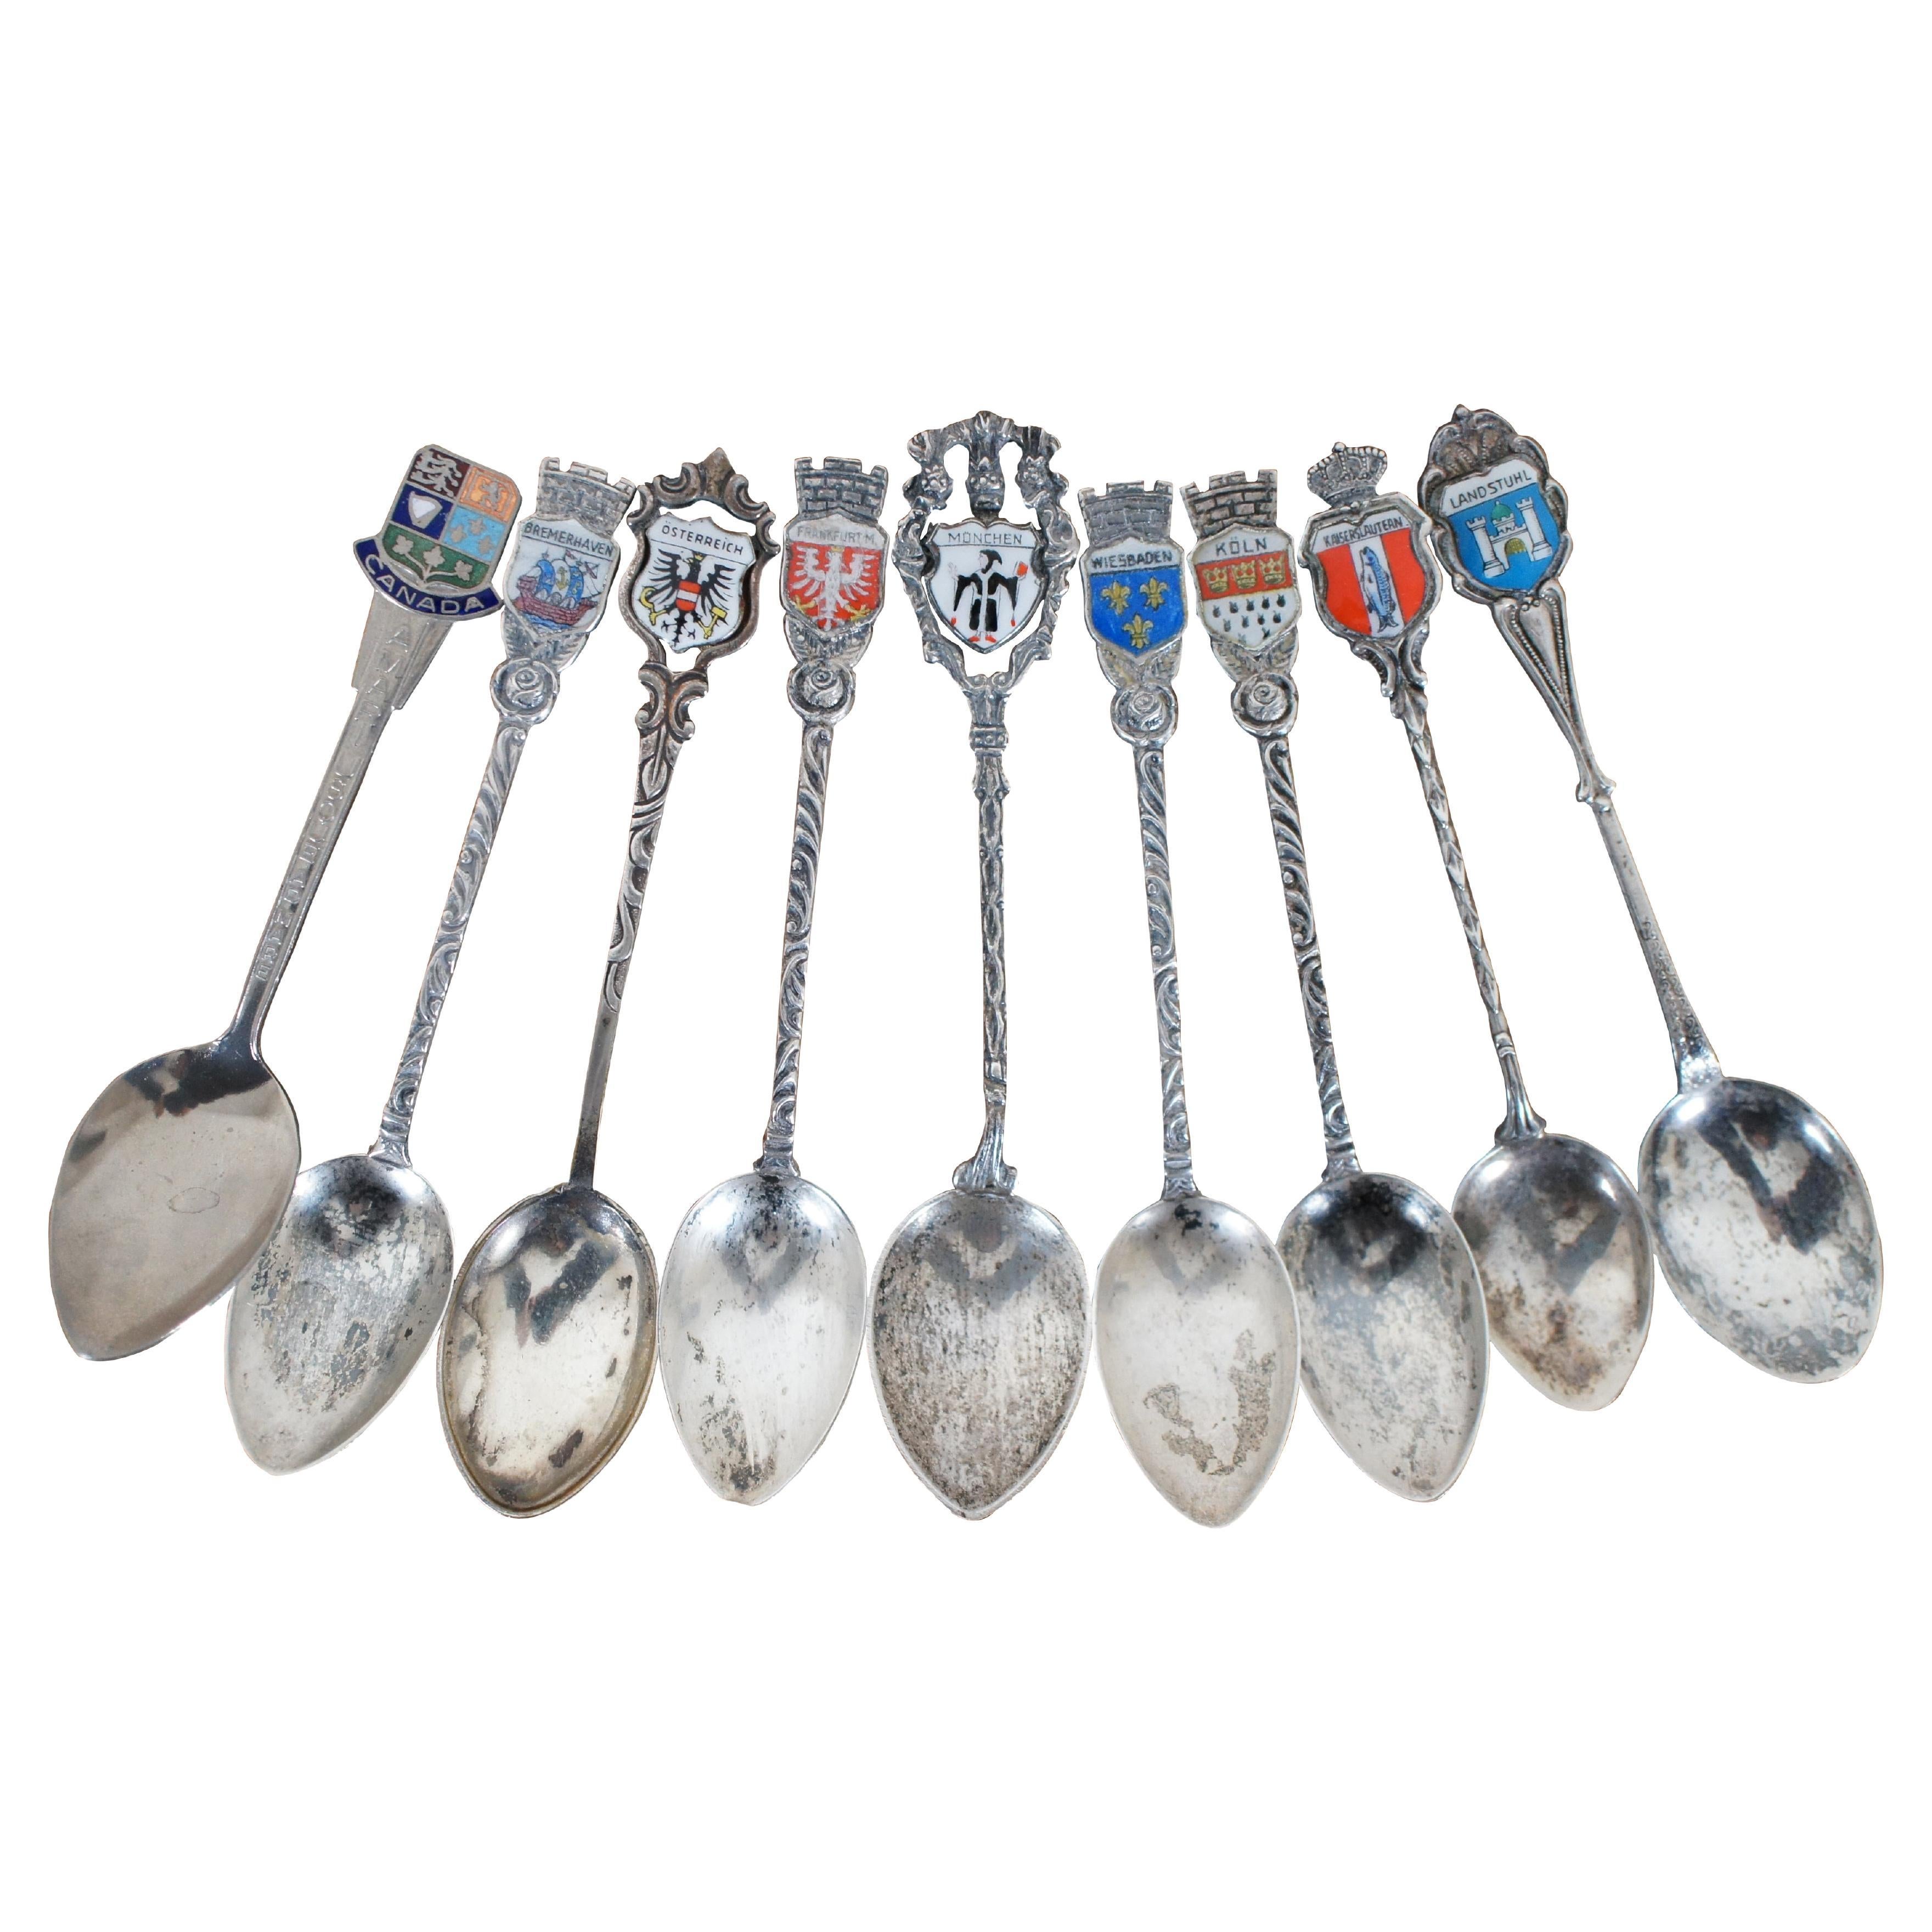 Decorative Spoon with Cup